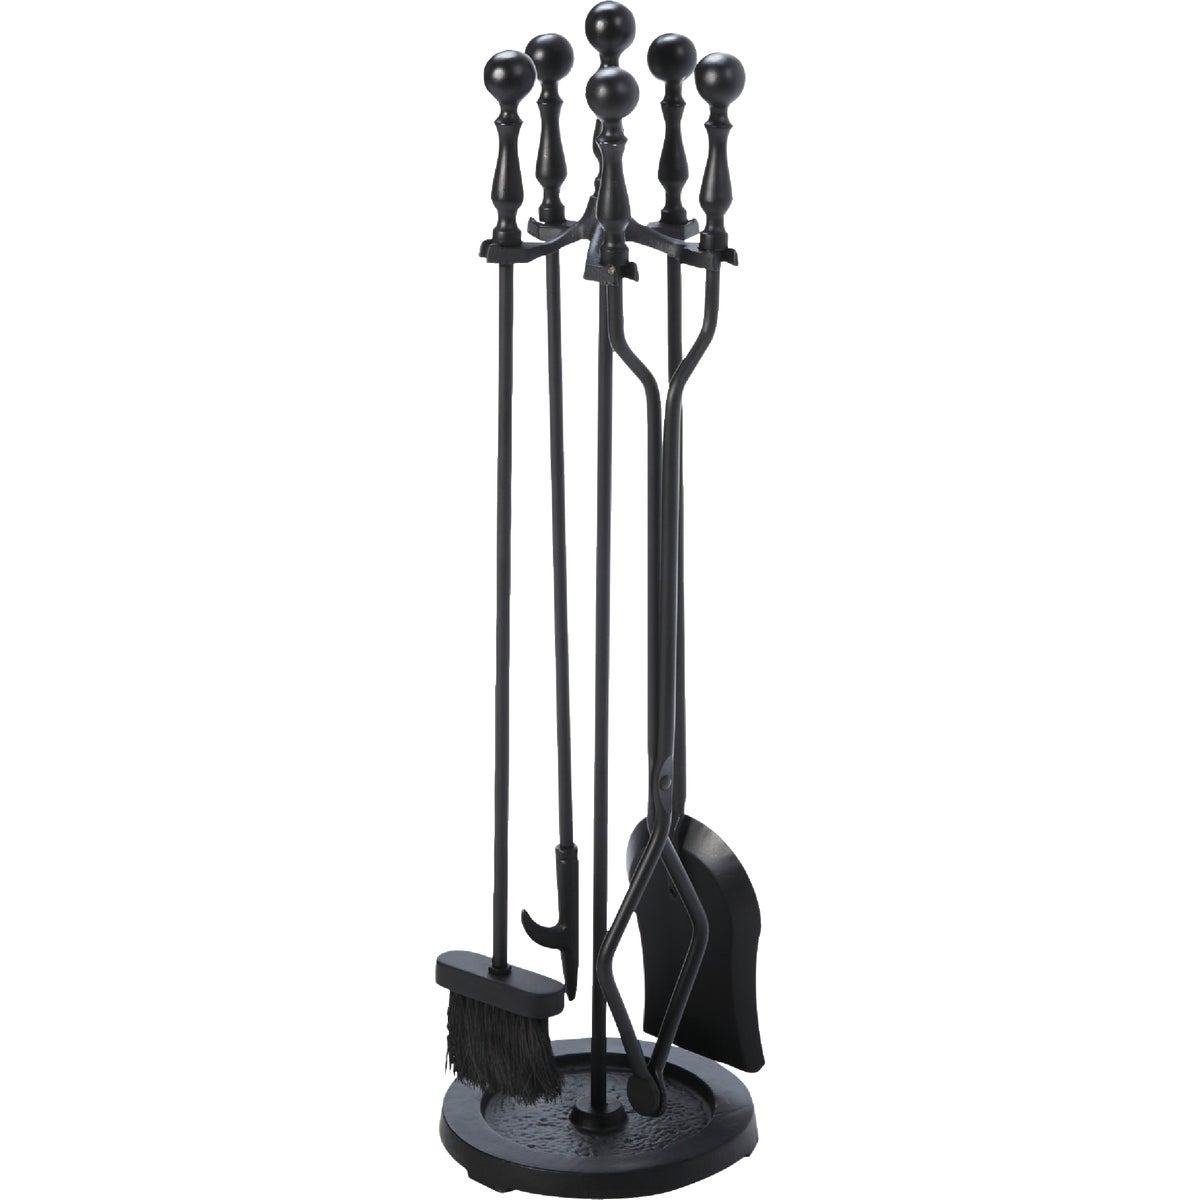 Item 403384, Tool set includes poker, shovel, brush, log mover and stand with round base